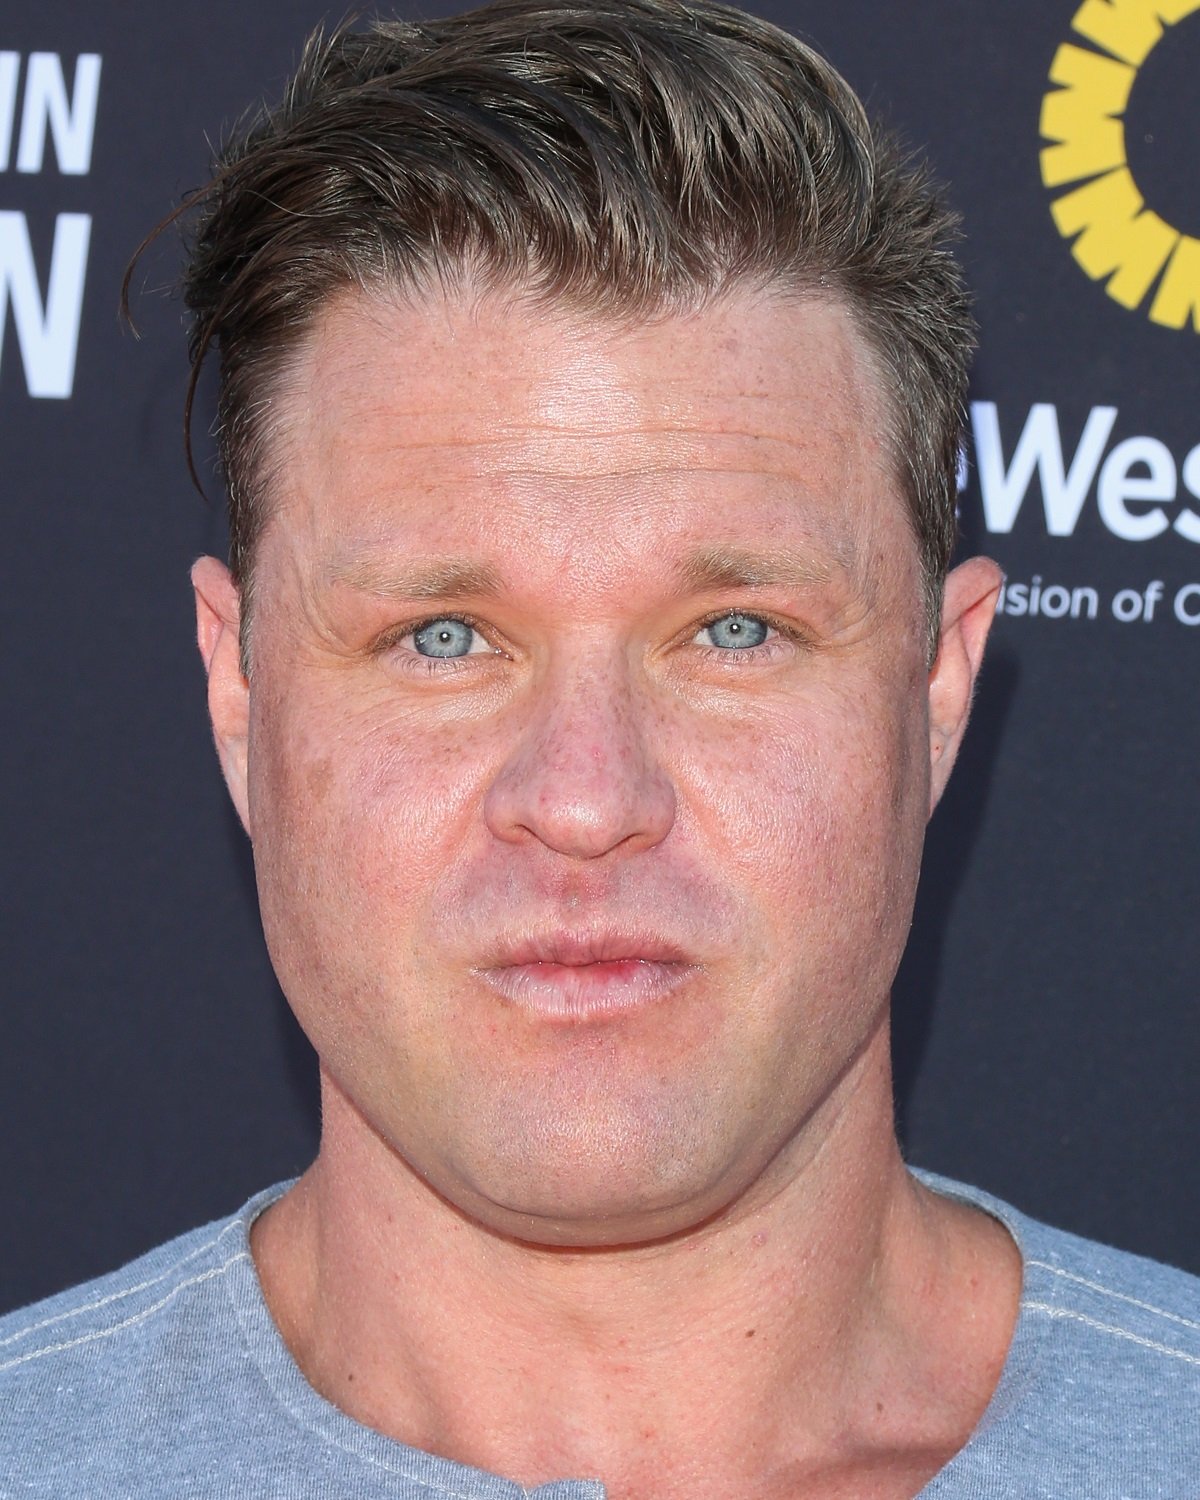 Zachery Ty Bryan attends the P.S. ARTS' Express Yourself 2016 event